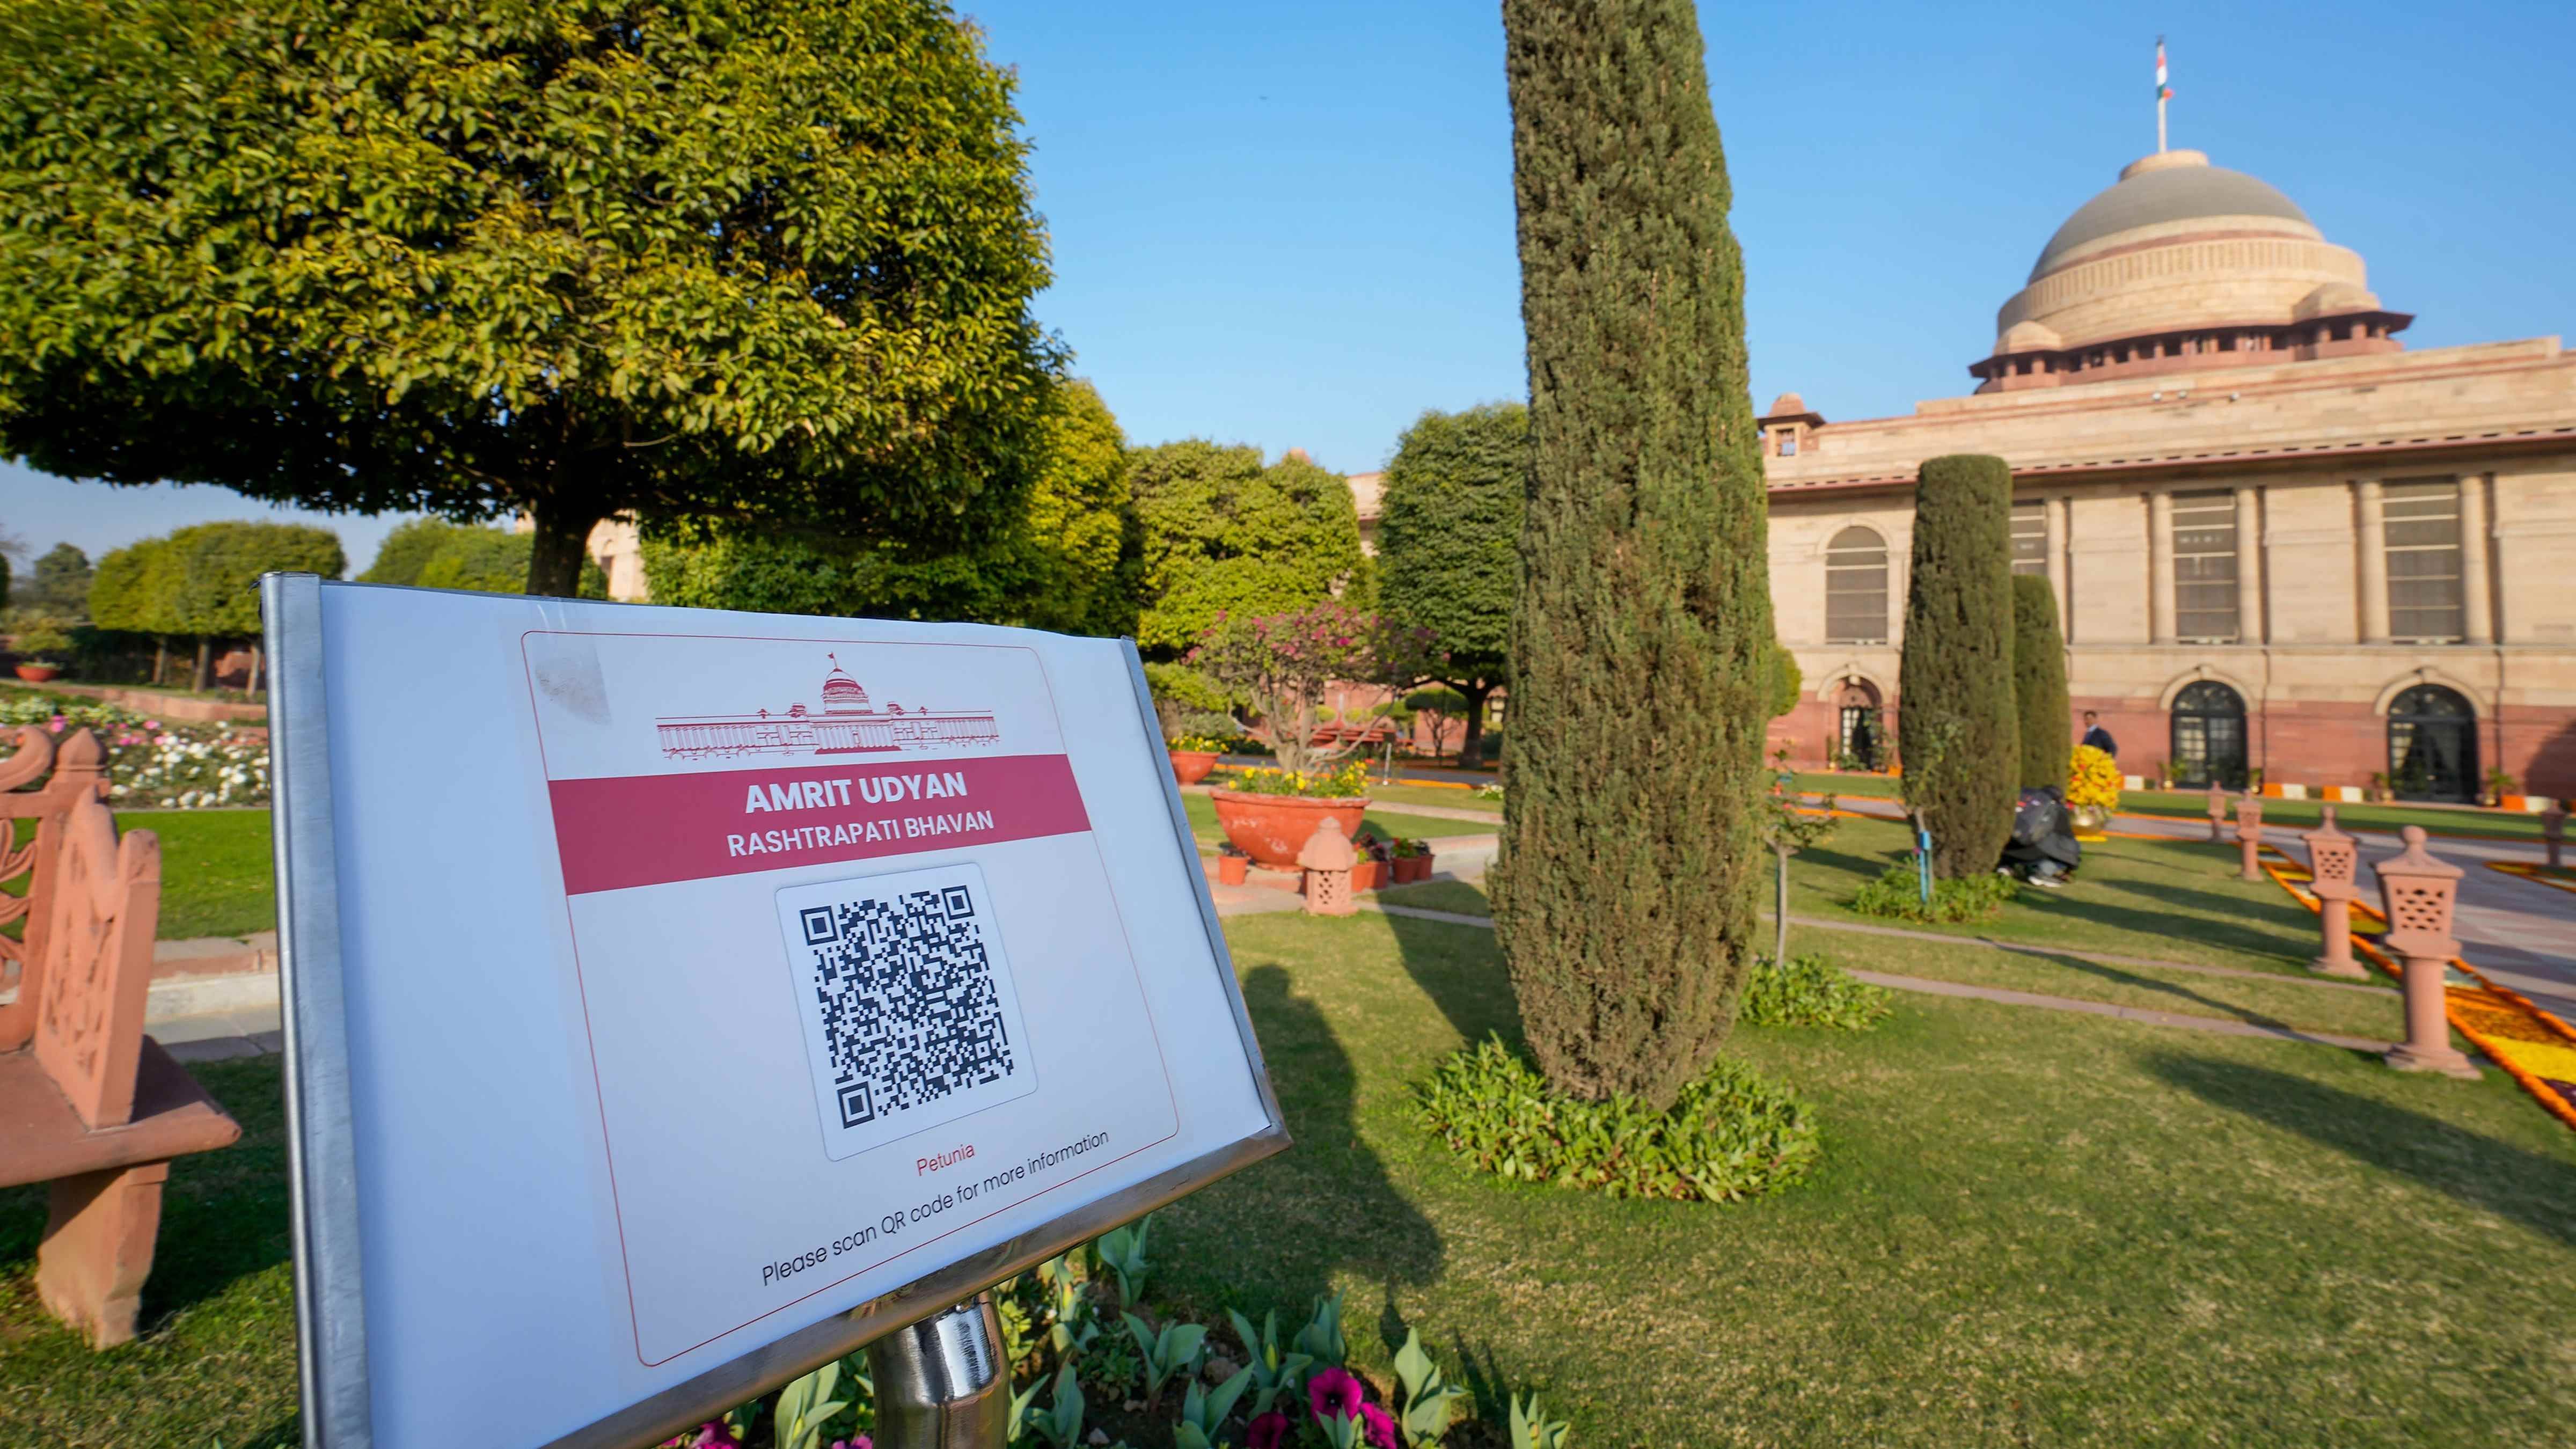 A signboard with a QR code having information about the flower species mentioned below the code at 'Amrit Udyan' on the premises of the Rashtrapati Bhavan. Credit: PTI Photo